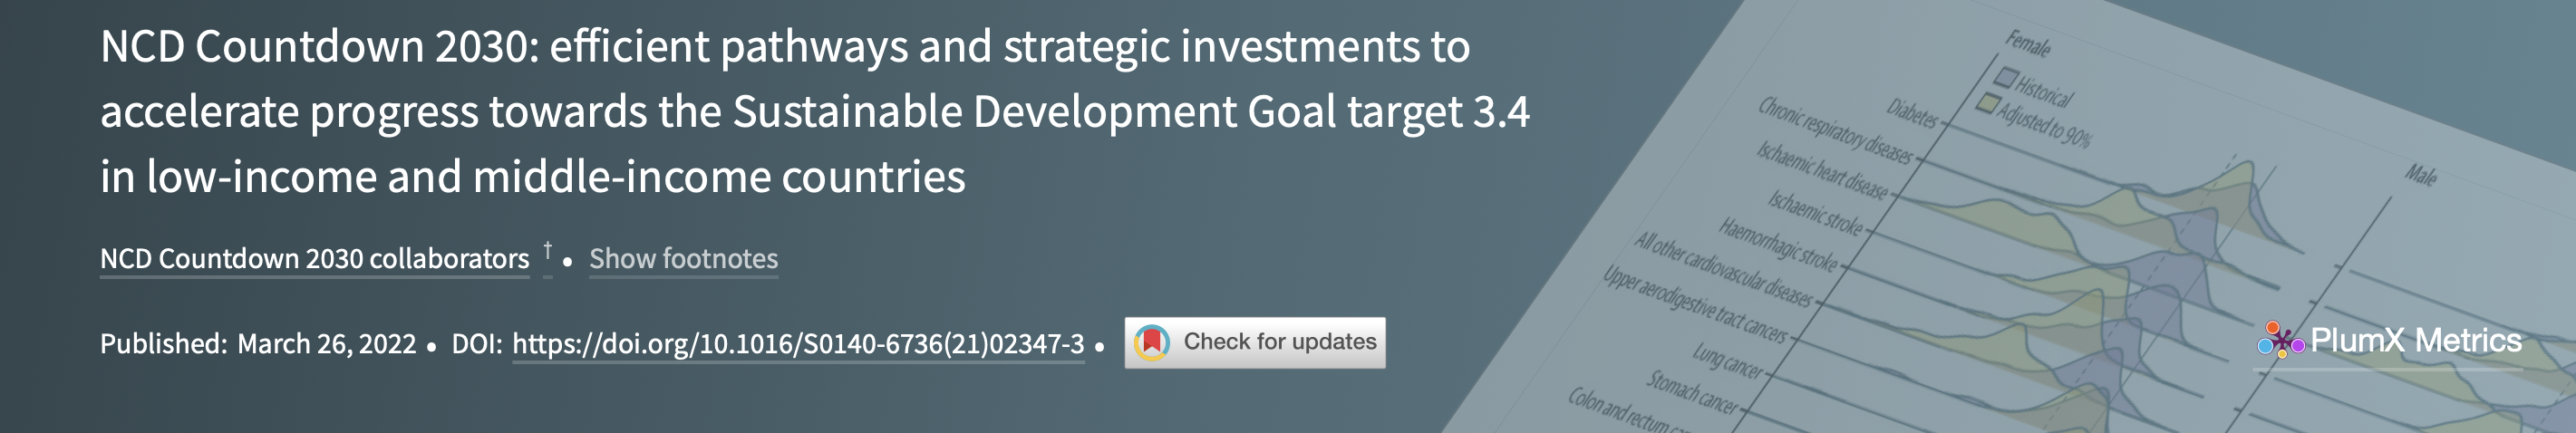 NCD Countdown 2030: efficient pathways and strategic investments to accelerate progress towards the Sustainable Development Goal target 3.4 in low-income and middle-income countries